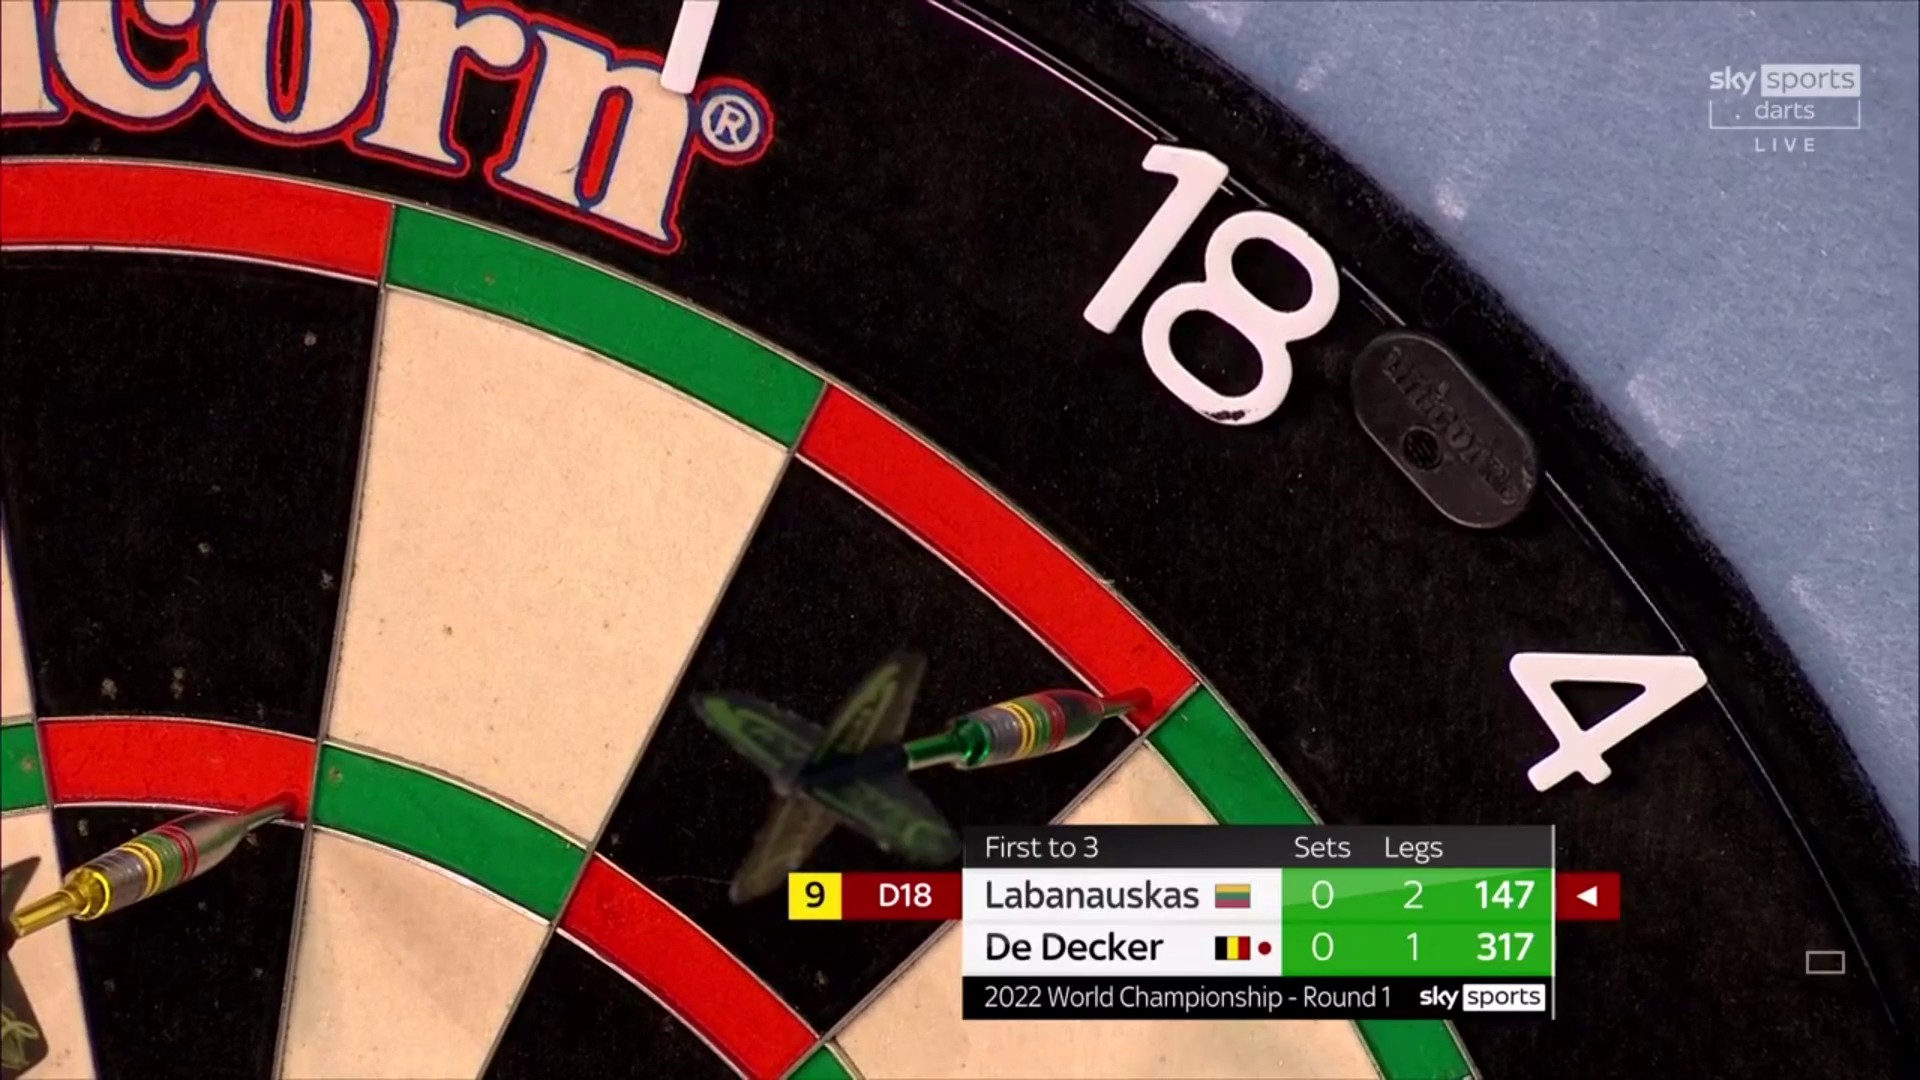 Sky Sports Darts on Twitter: "𝐋𝐔𝐂𝐊𝐘 𝐃 𝐋𝐀𝐍𝐃𝐒 𝐓𝐇𝐄 🤯 INCREDIBLE SCENES AT ALLY PALLY! 💥💥 Darius Labanauskas hits the second nine-darter in 24 hours at the World Championship! 🎉 📺